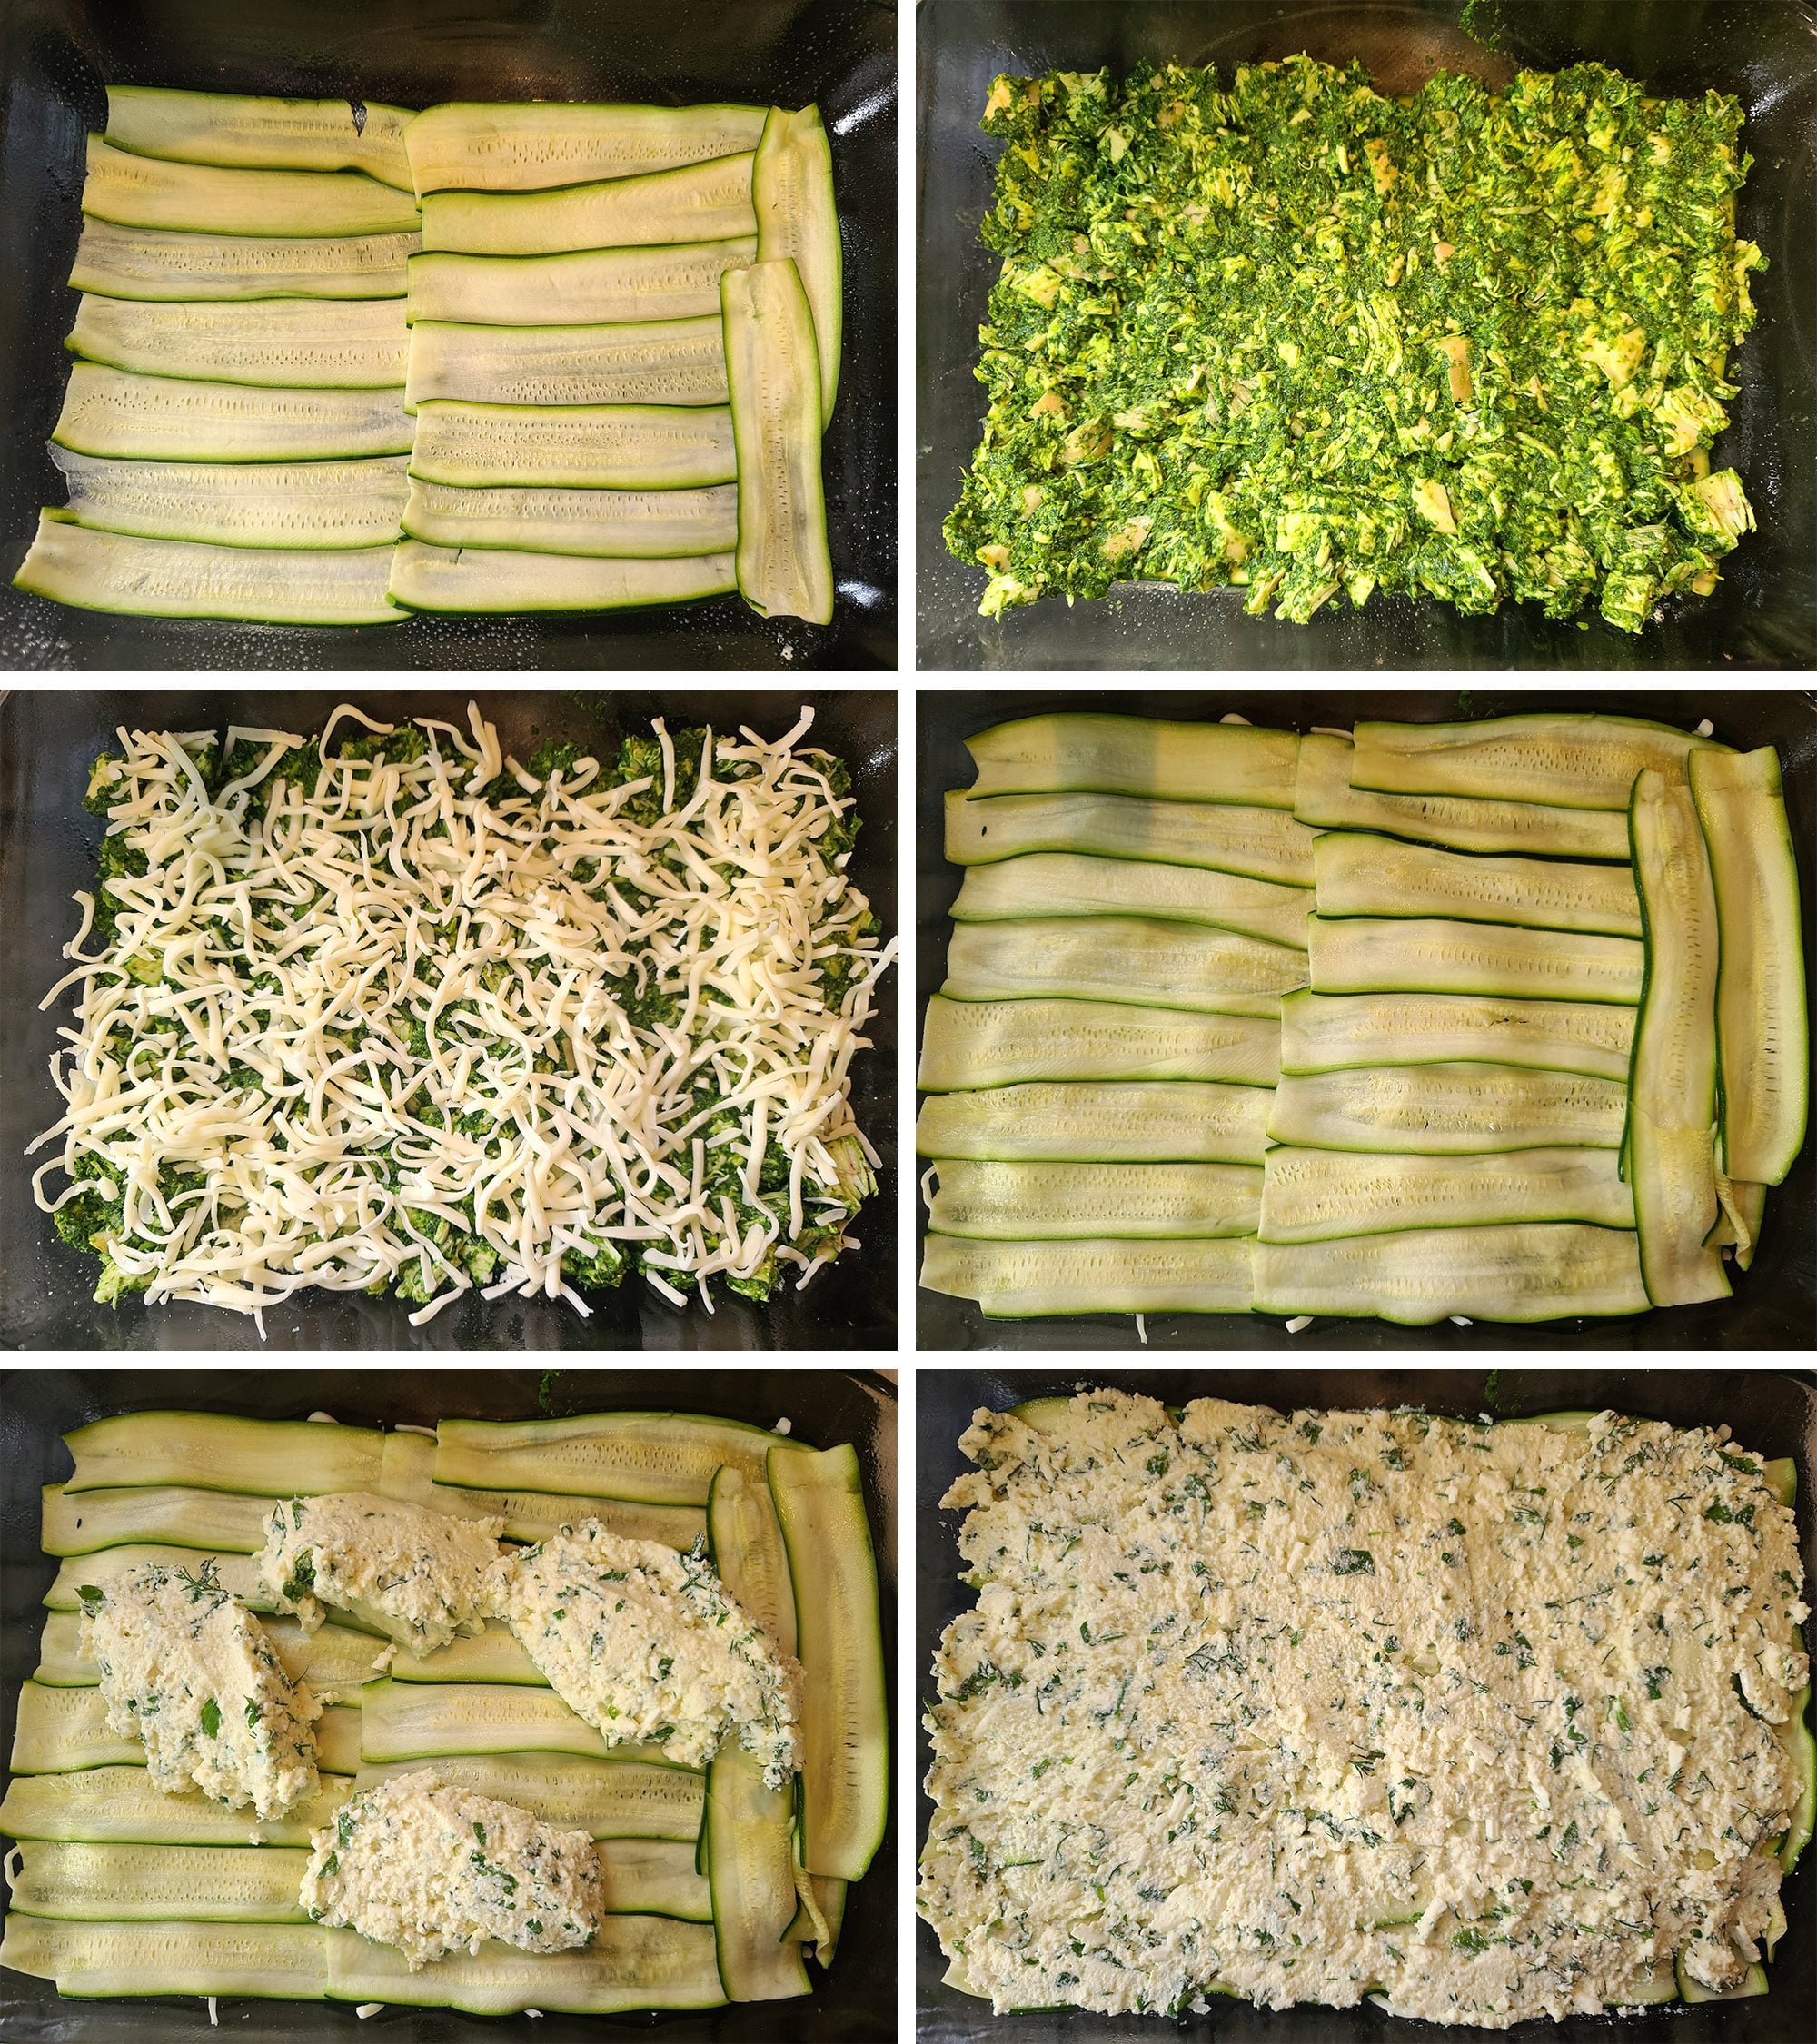 A 6 part image showing the first few layers of the spinach feta lasagna being assembled.